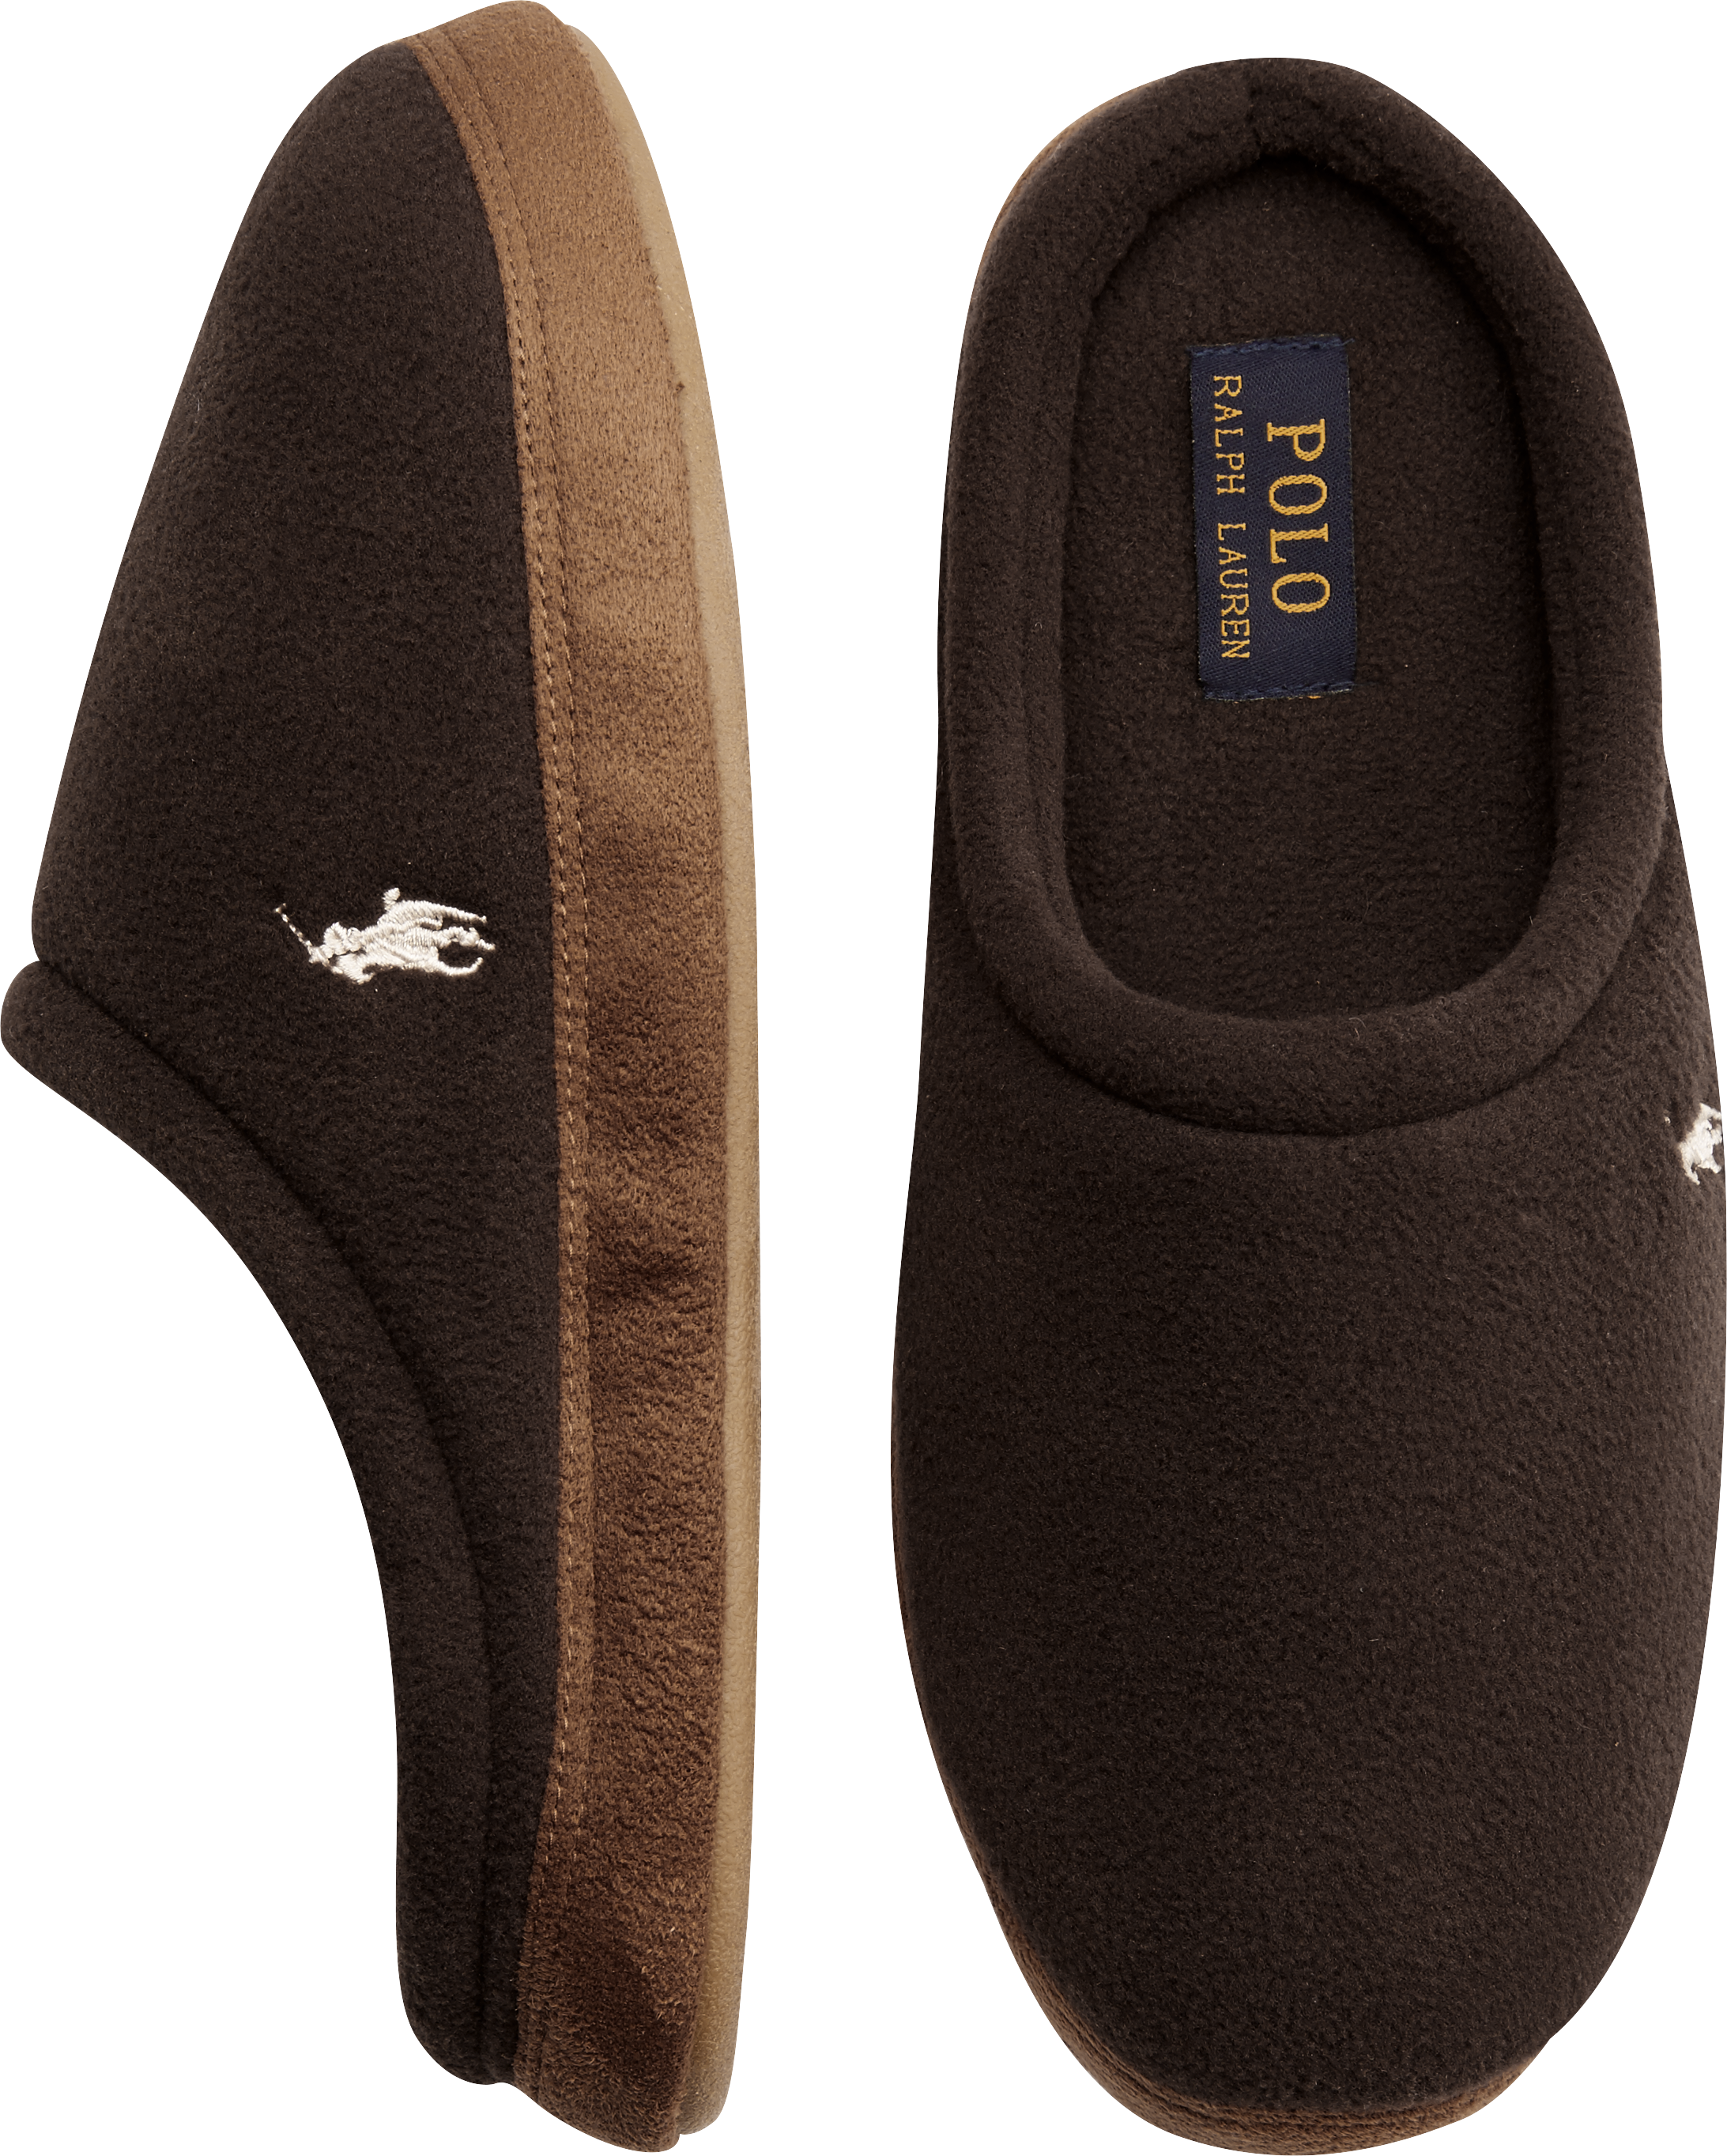 polo house slippers